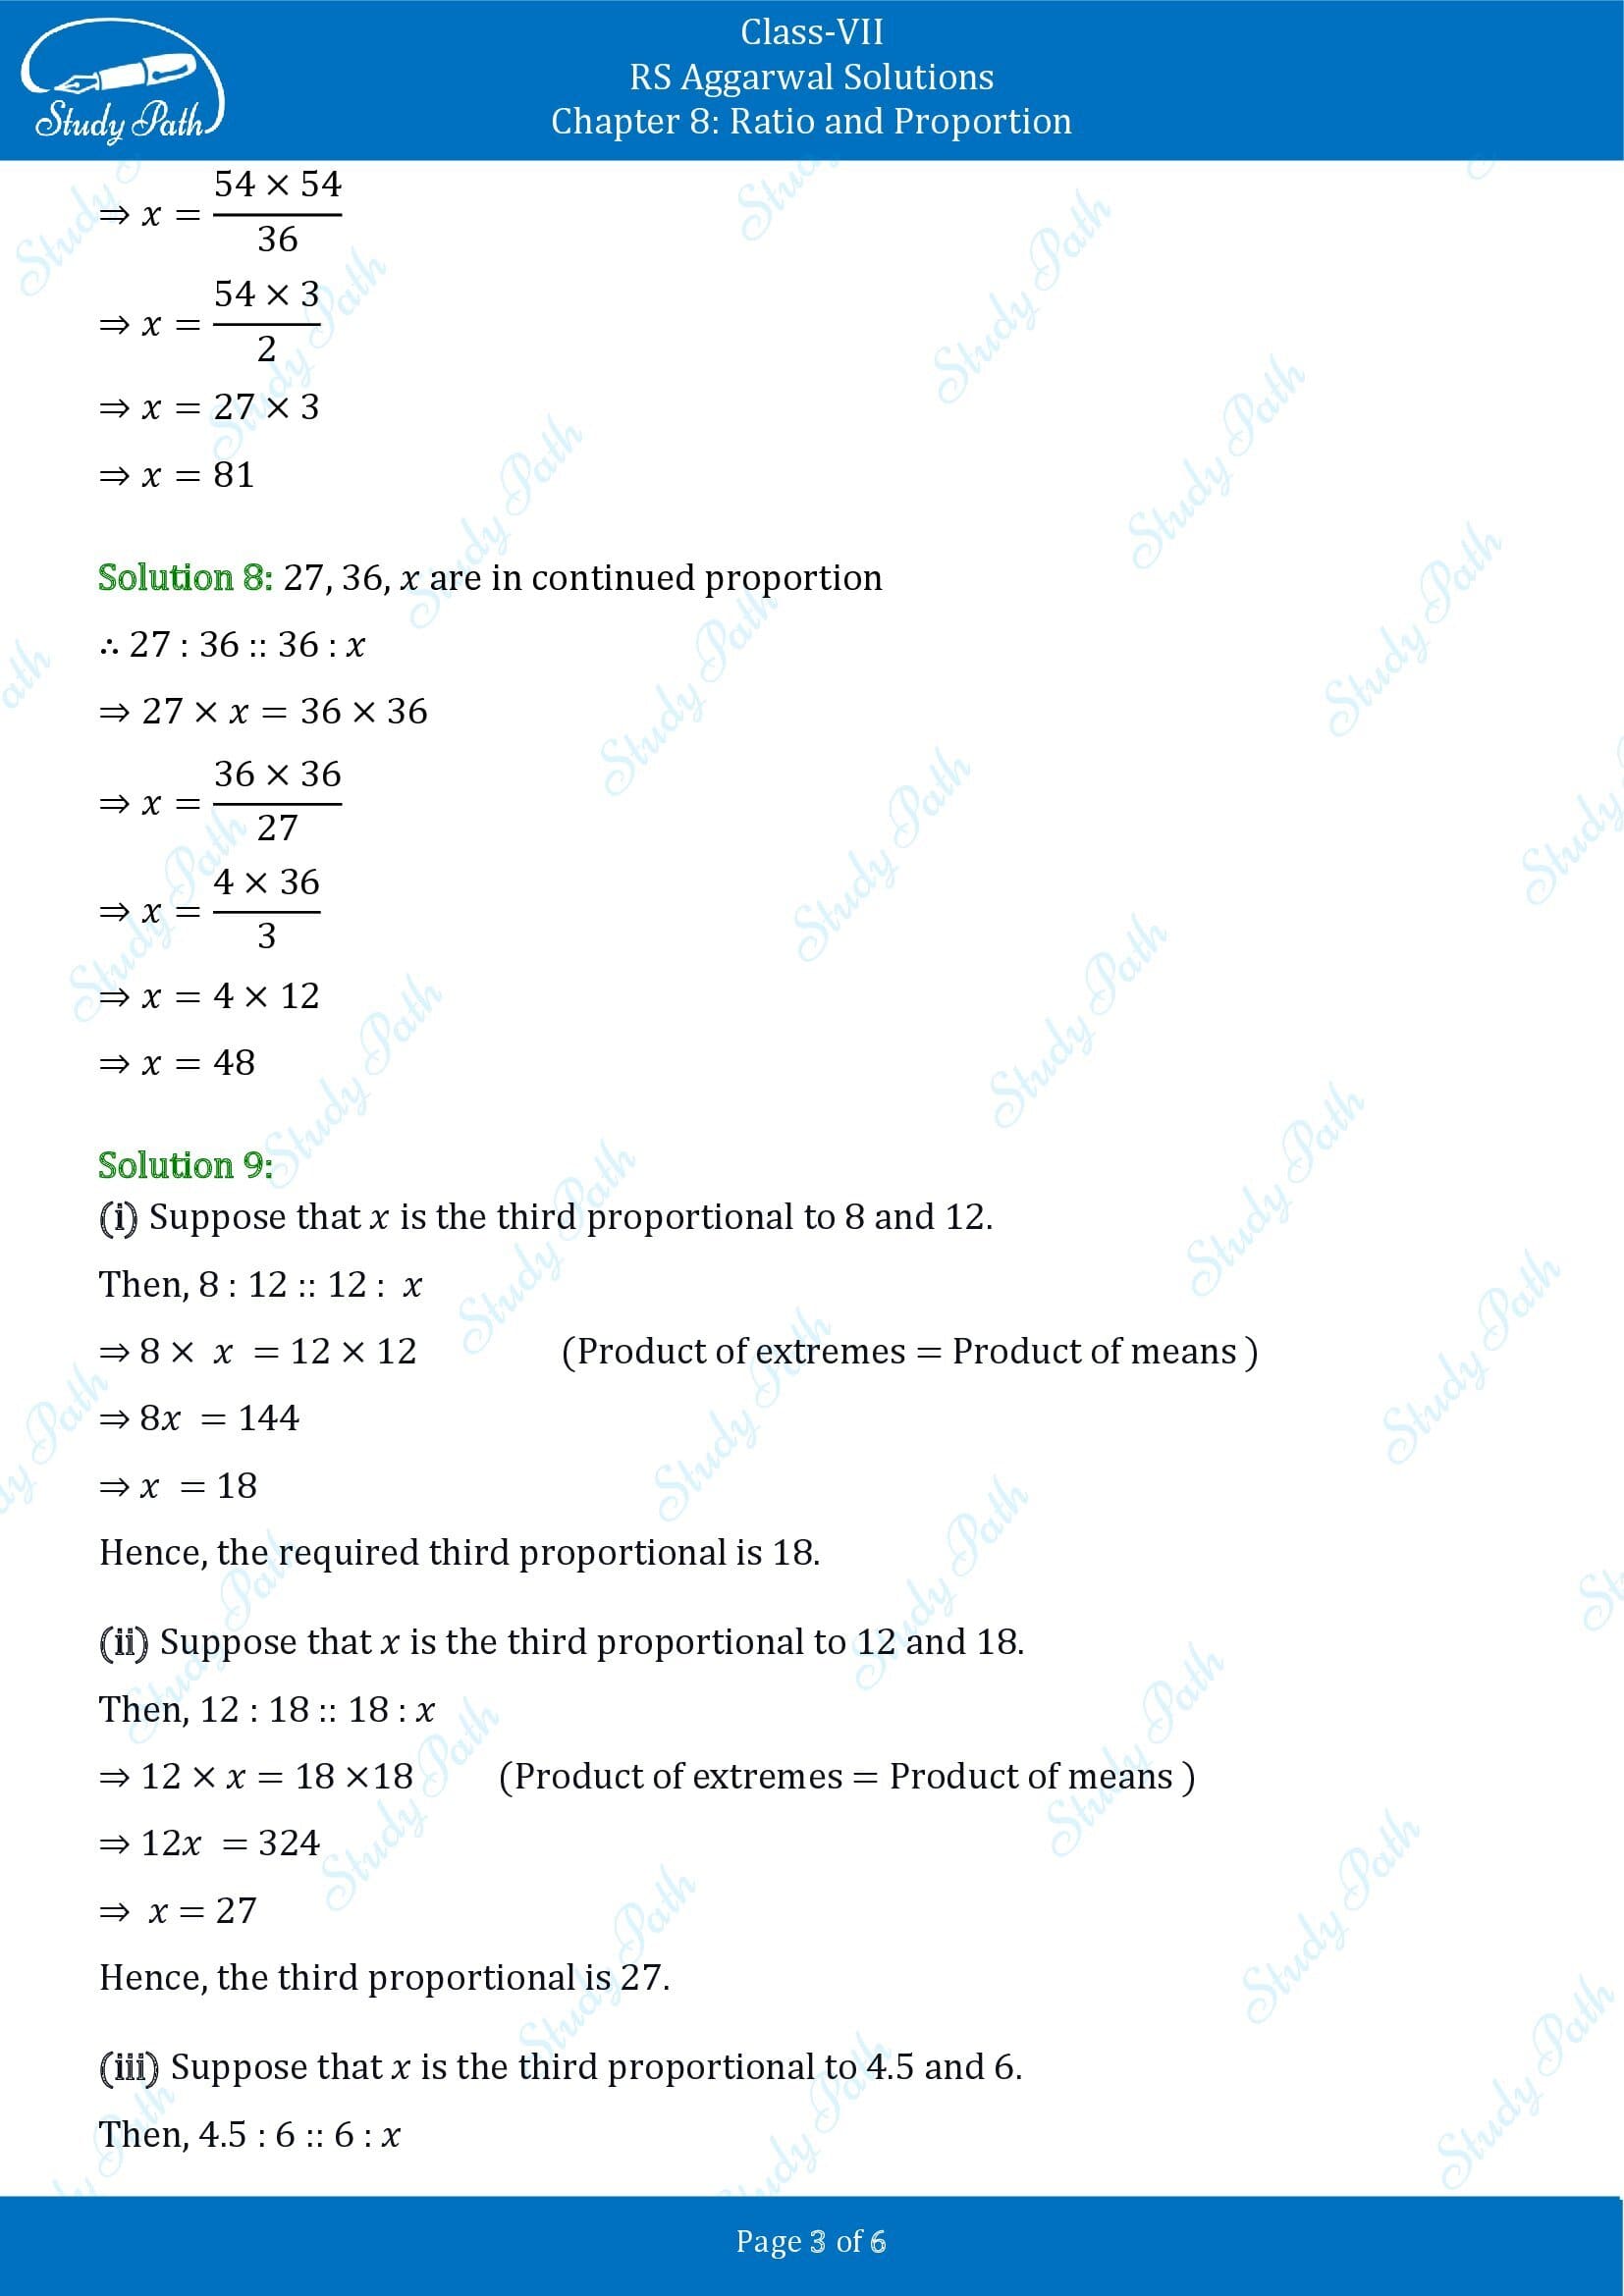 RS Aggarwal Solutions Class 7 Chapter 8 Ratio and Proportion Exercise 8B 00003